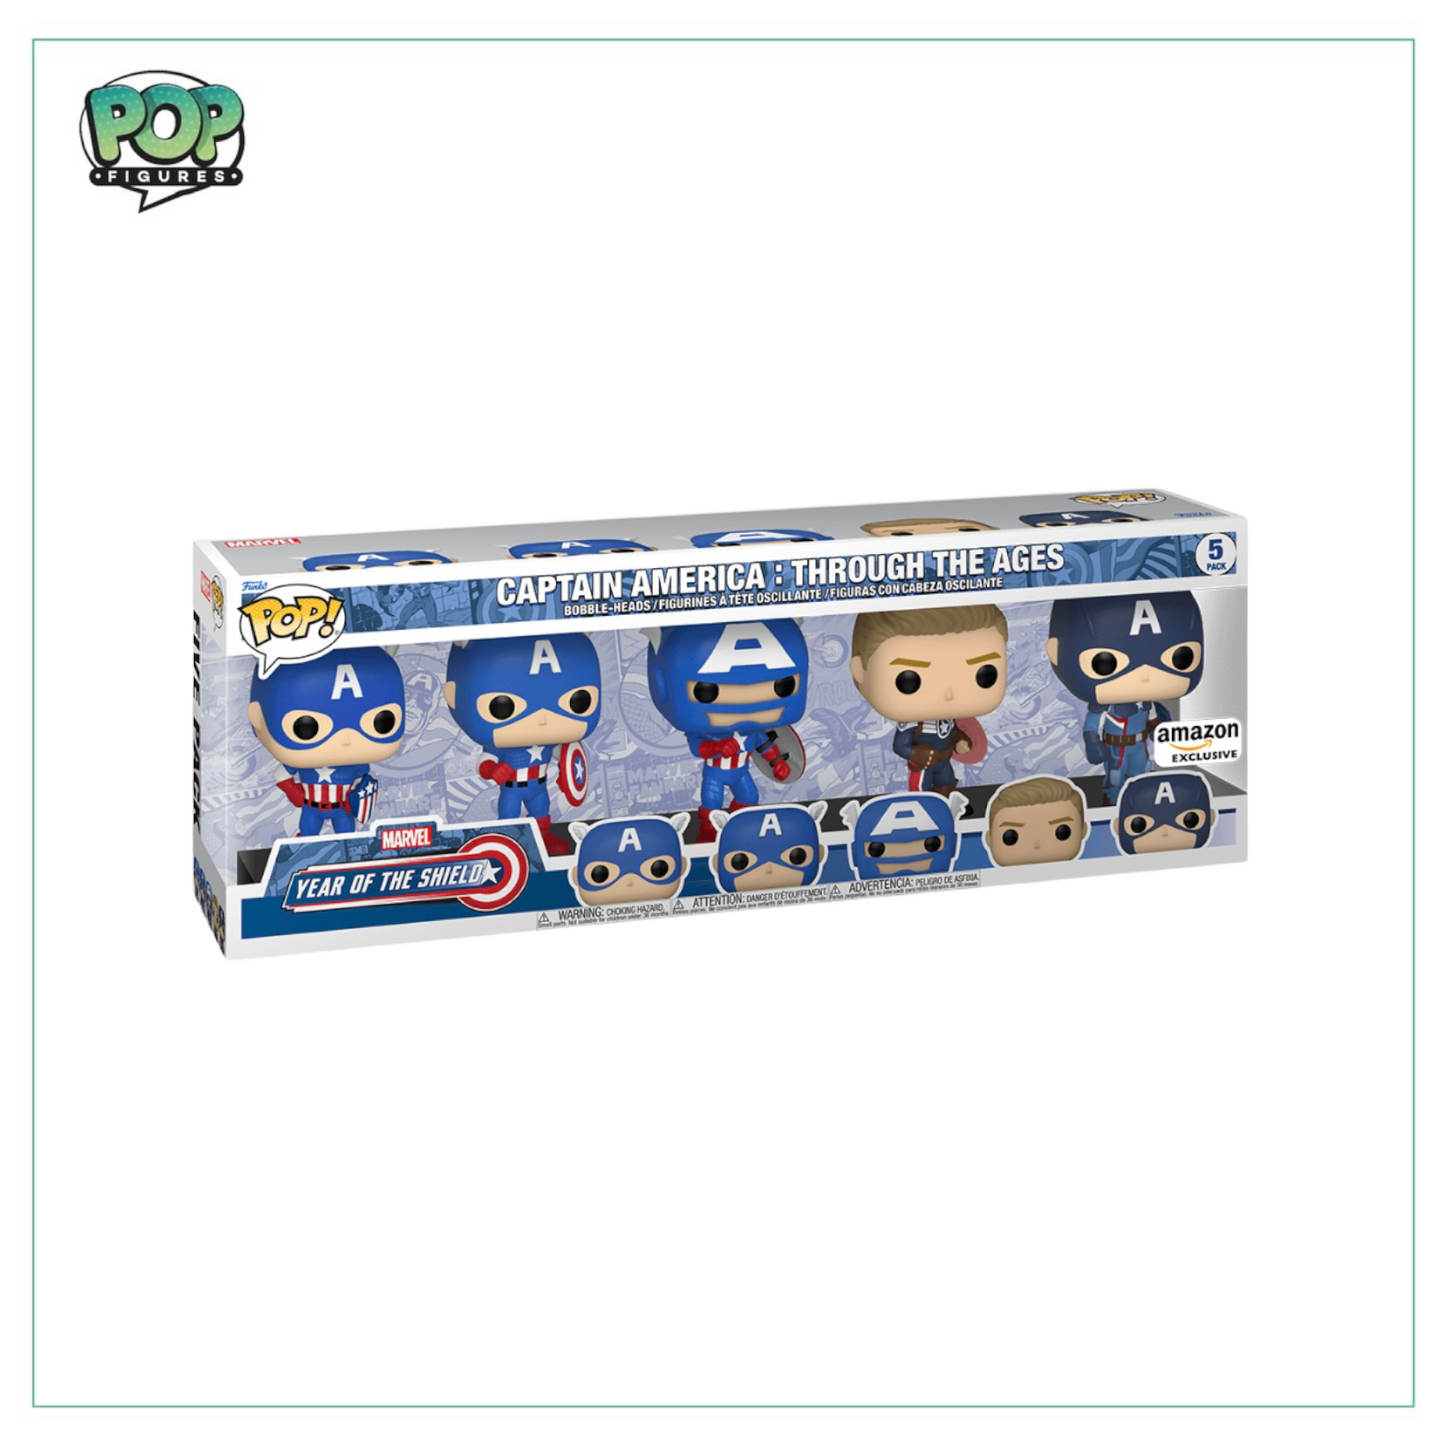 Captain America Through the Ages Deluxe Funko 5 Pack! Marvel - Amazon Exclusive - Angry Cat